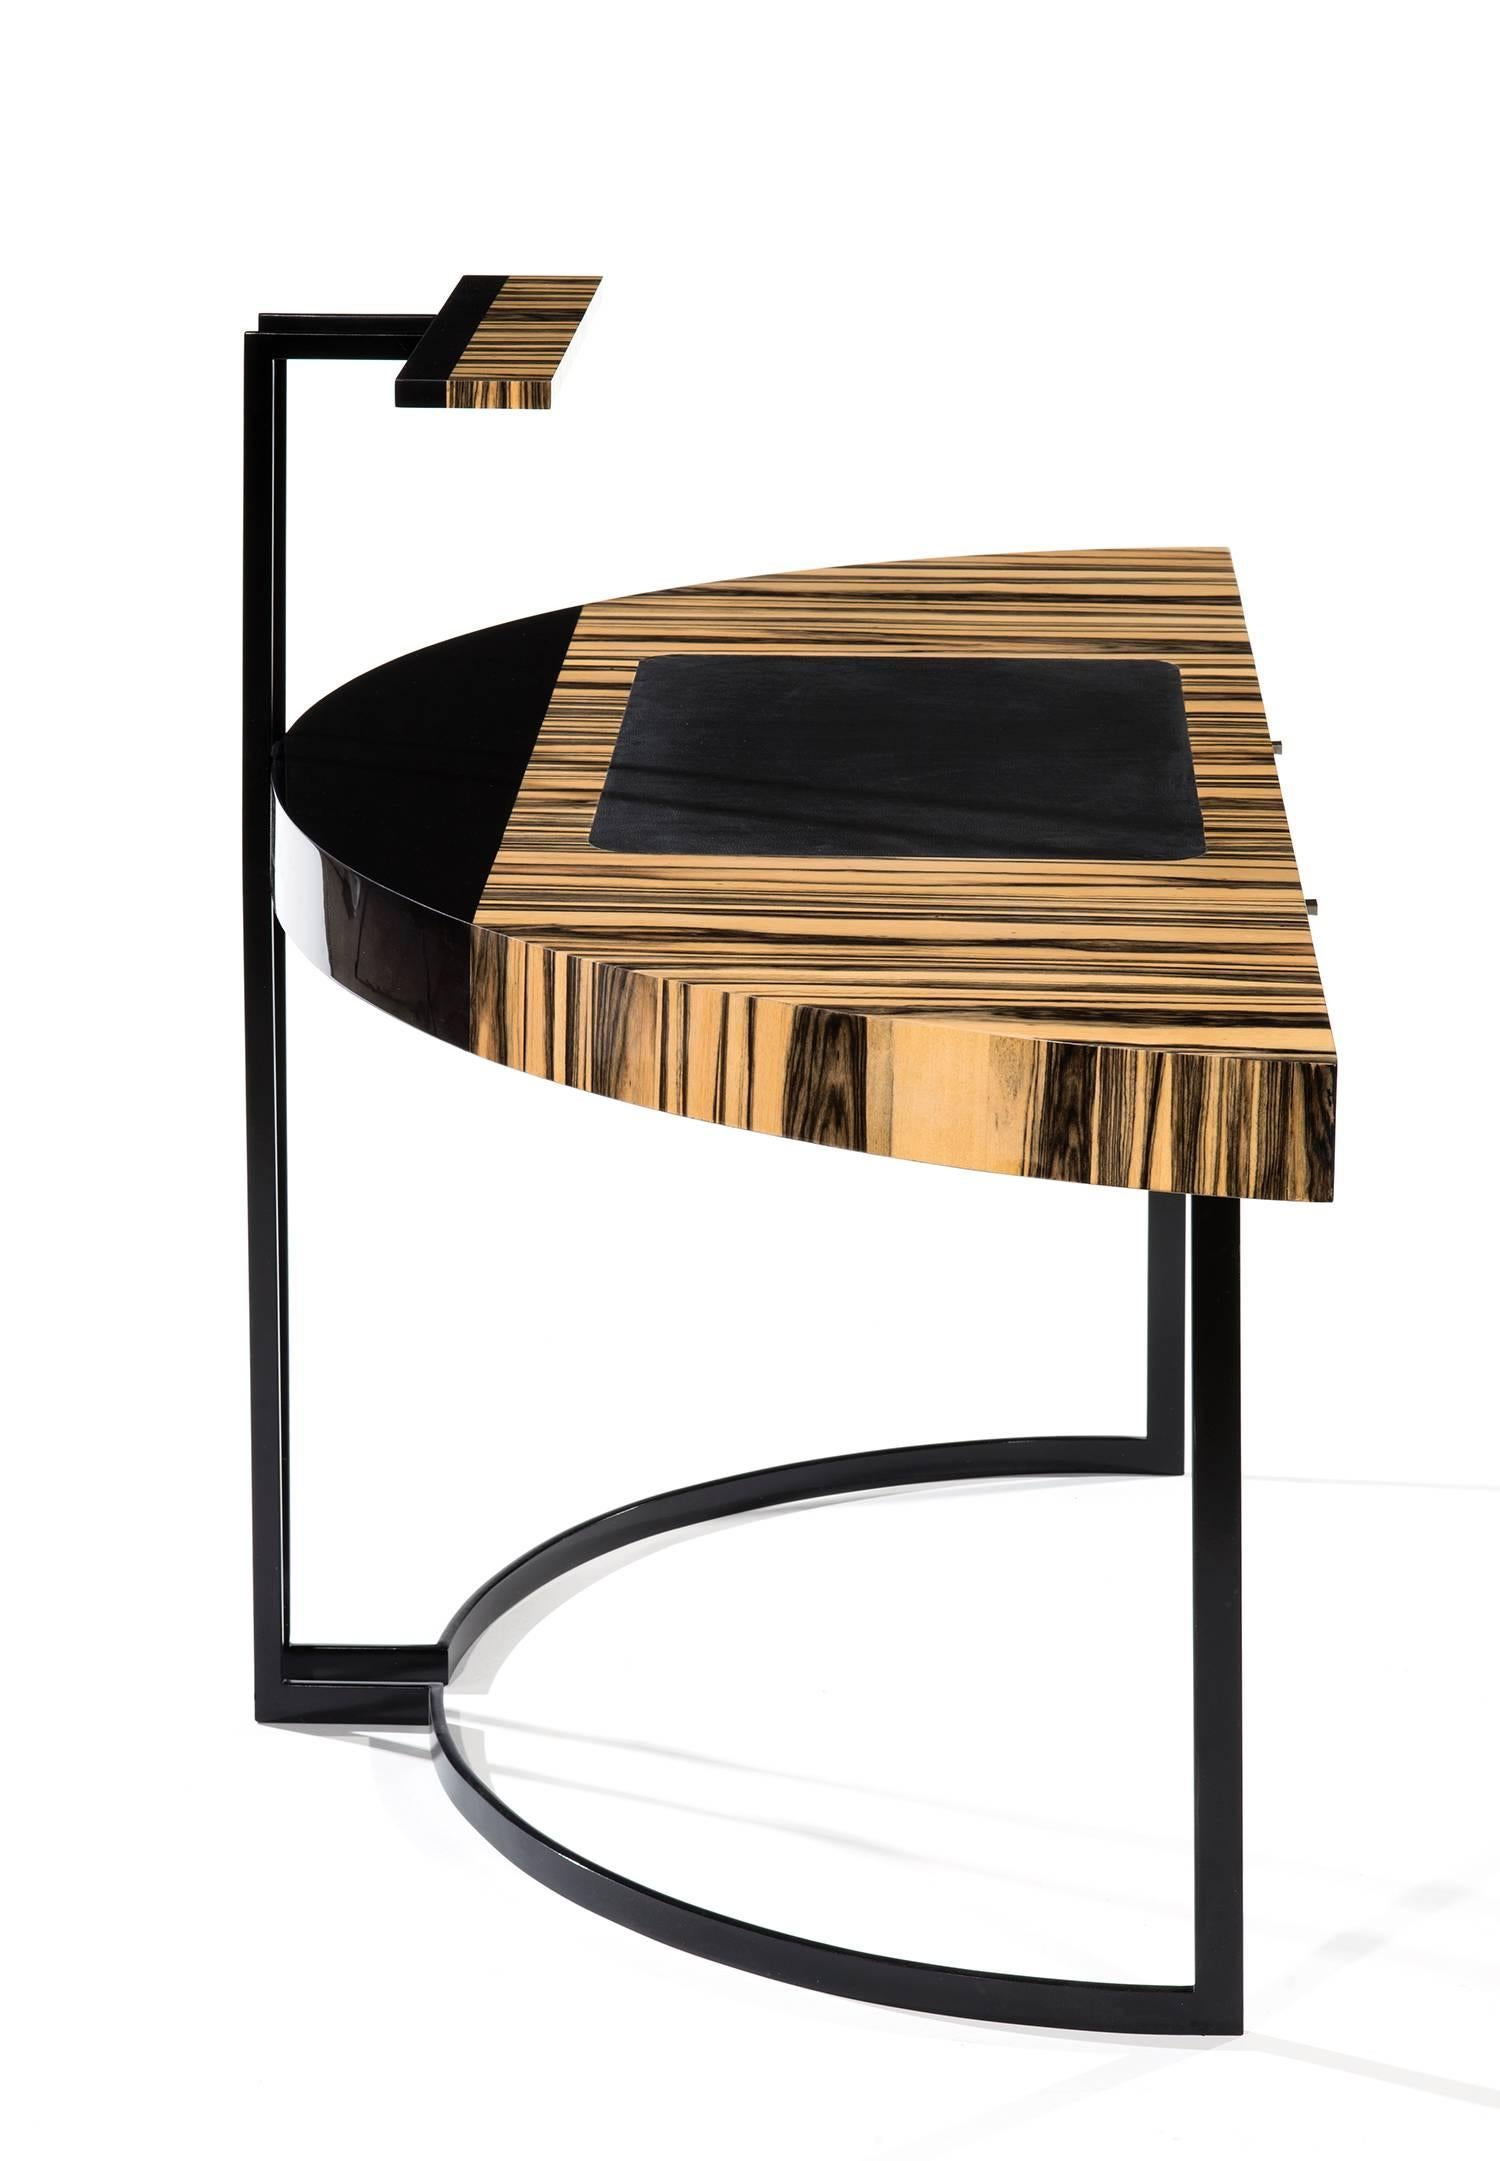 French 21st Century Desk Wight Ebony and Black Leather with Metal Leg by Aymeric Lefort For Sale